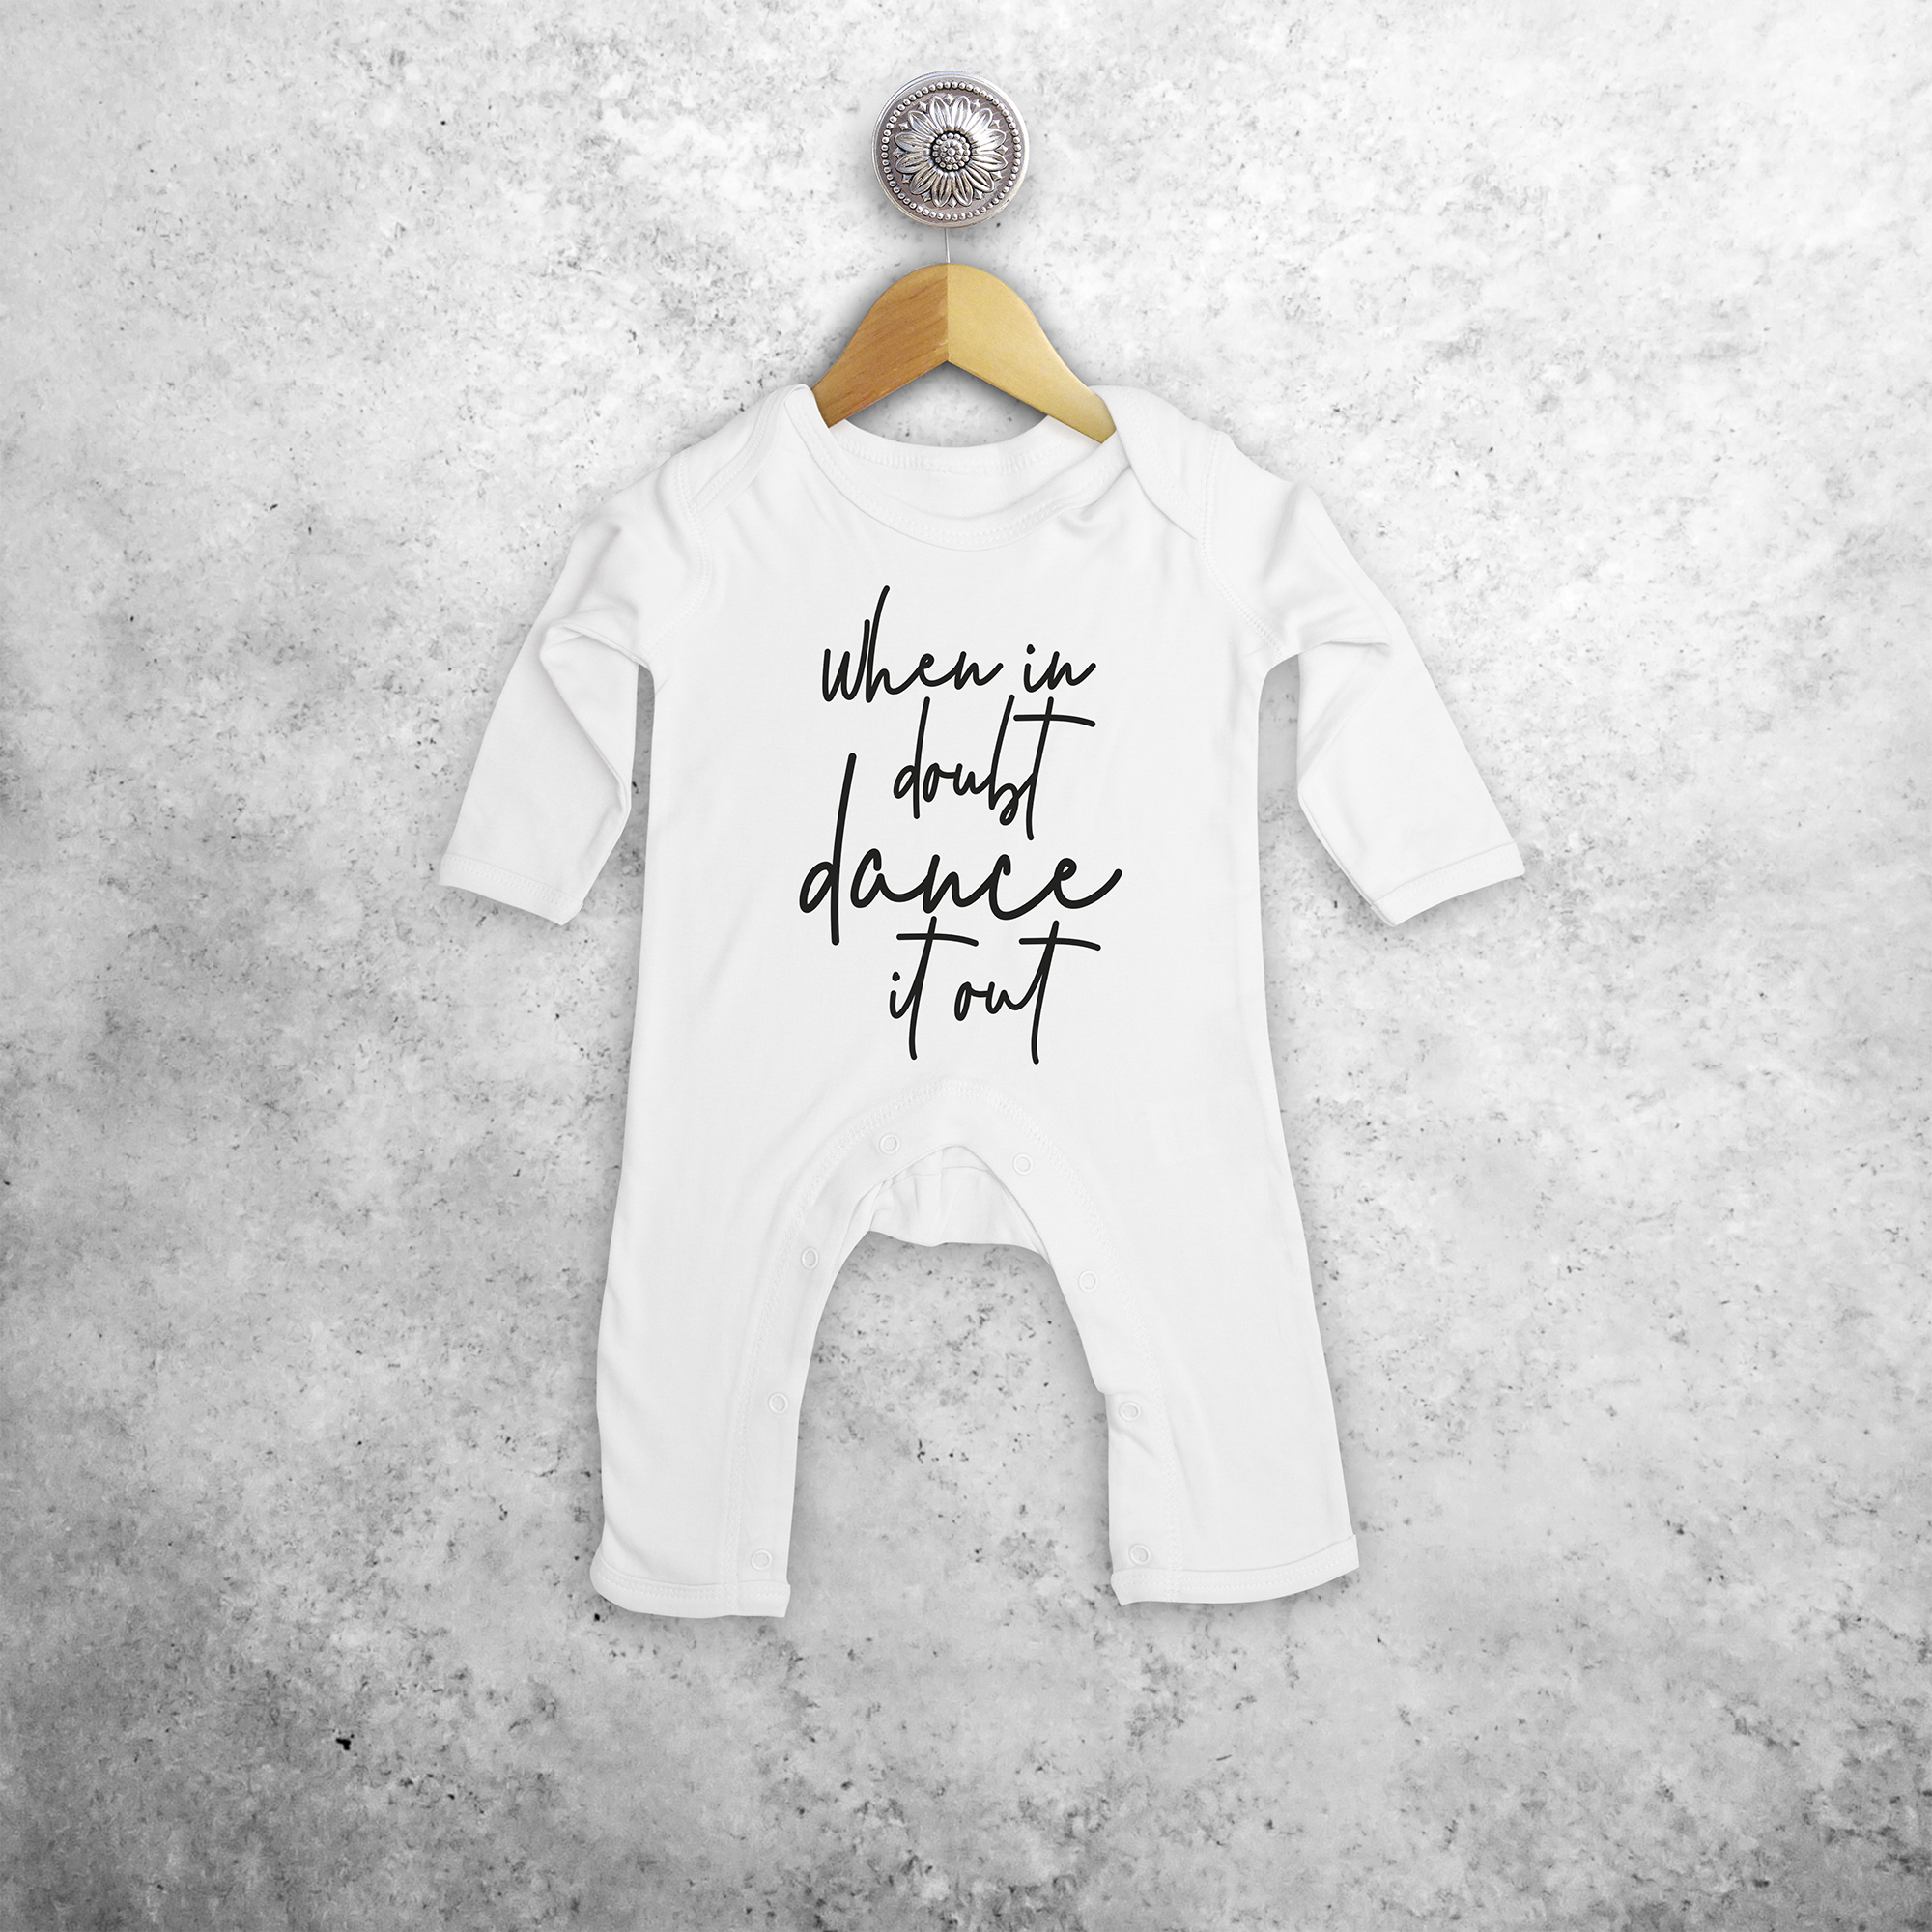 'When in doubt dance it out' baby romper